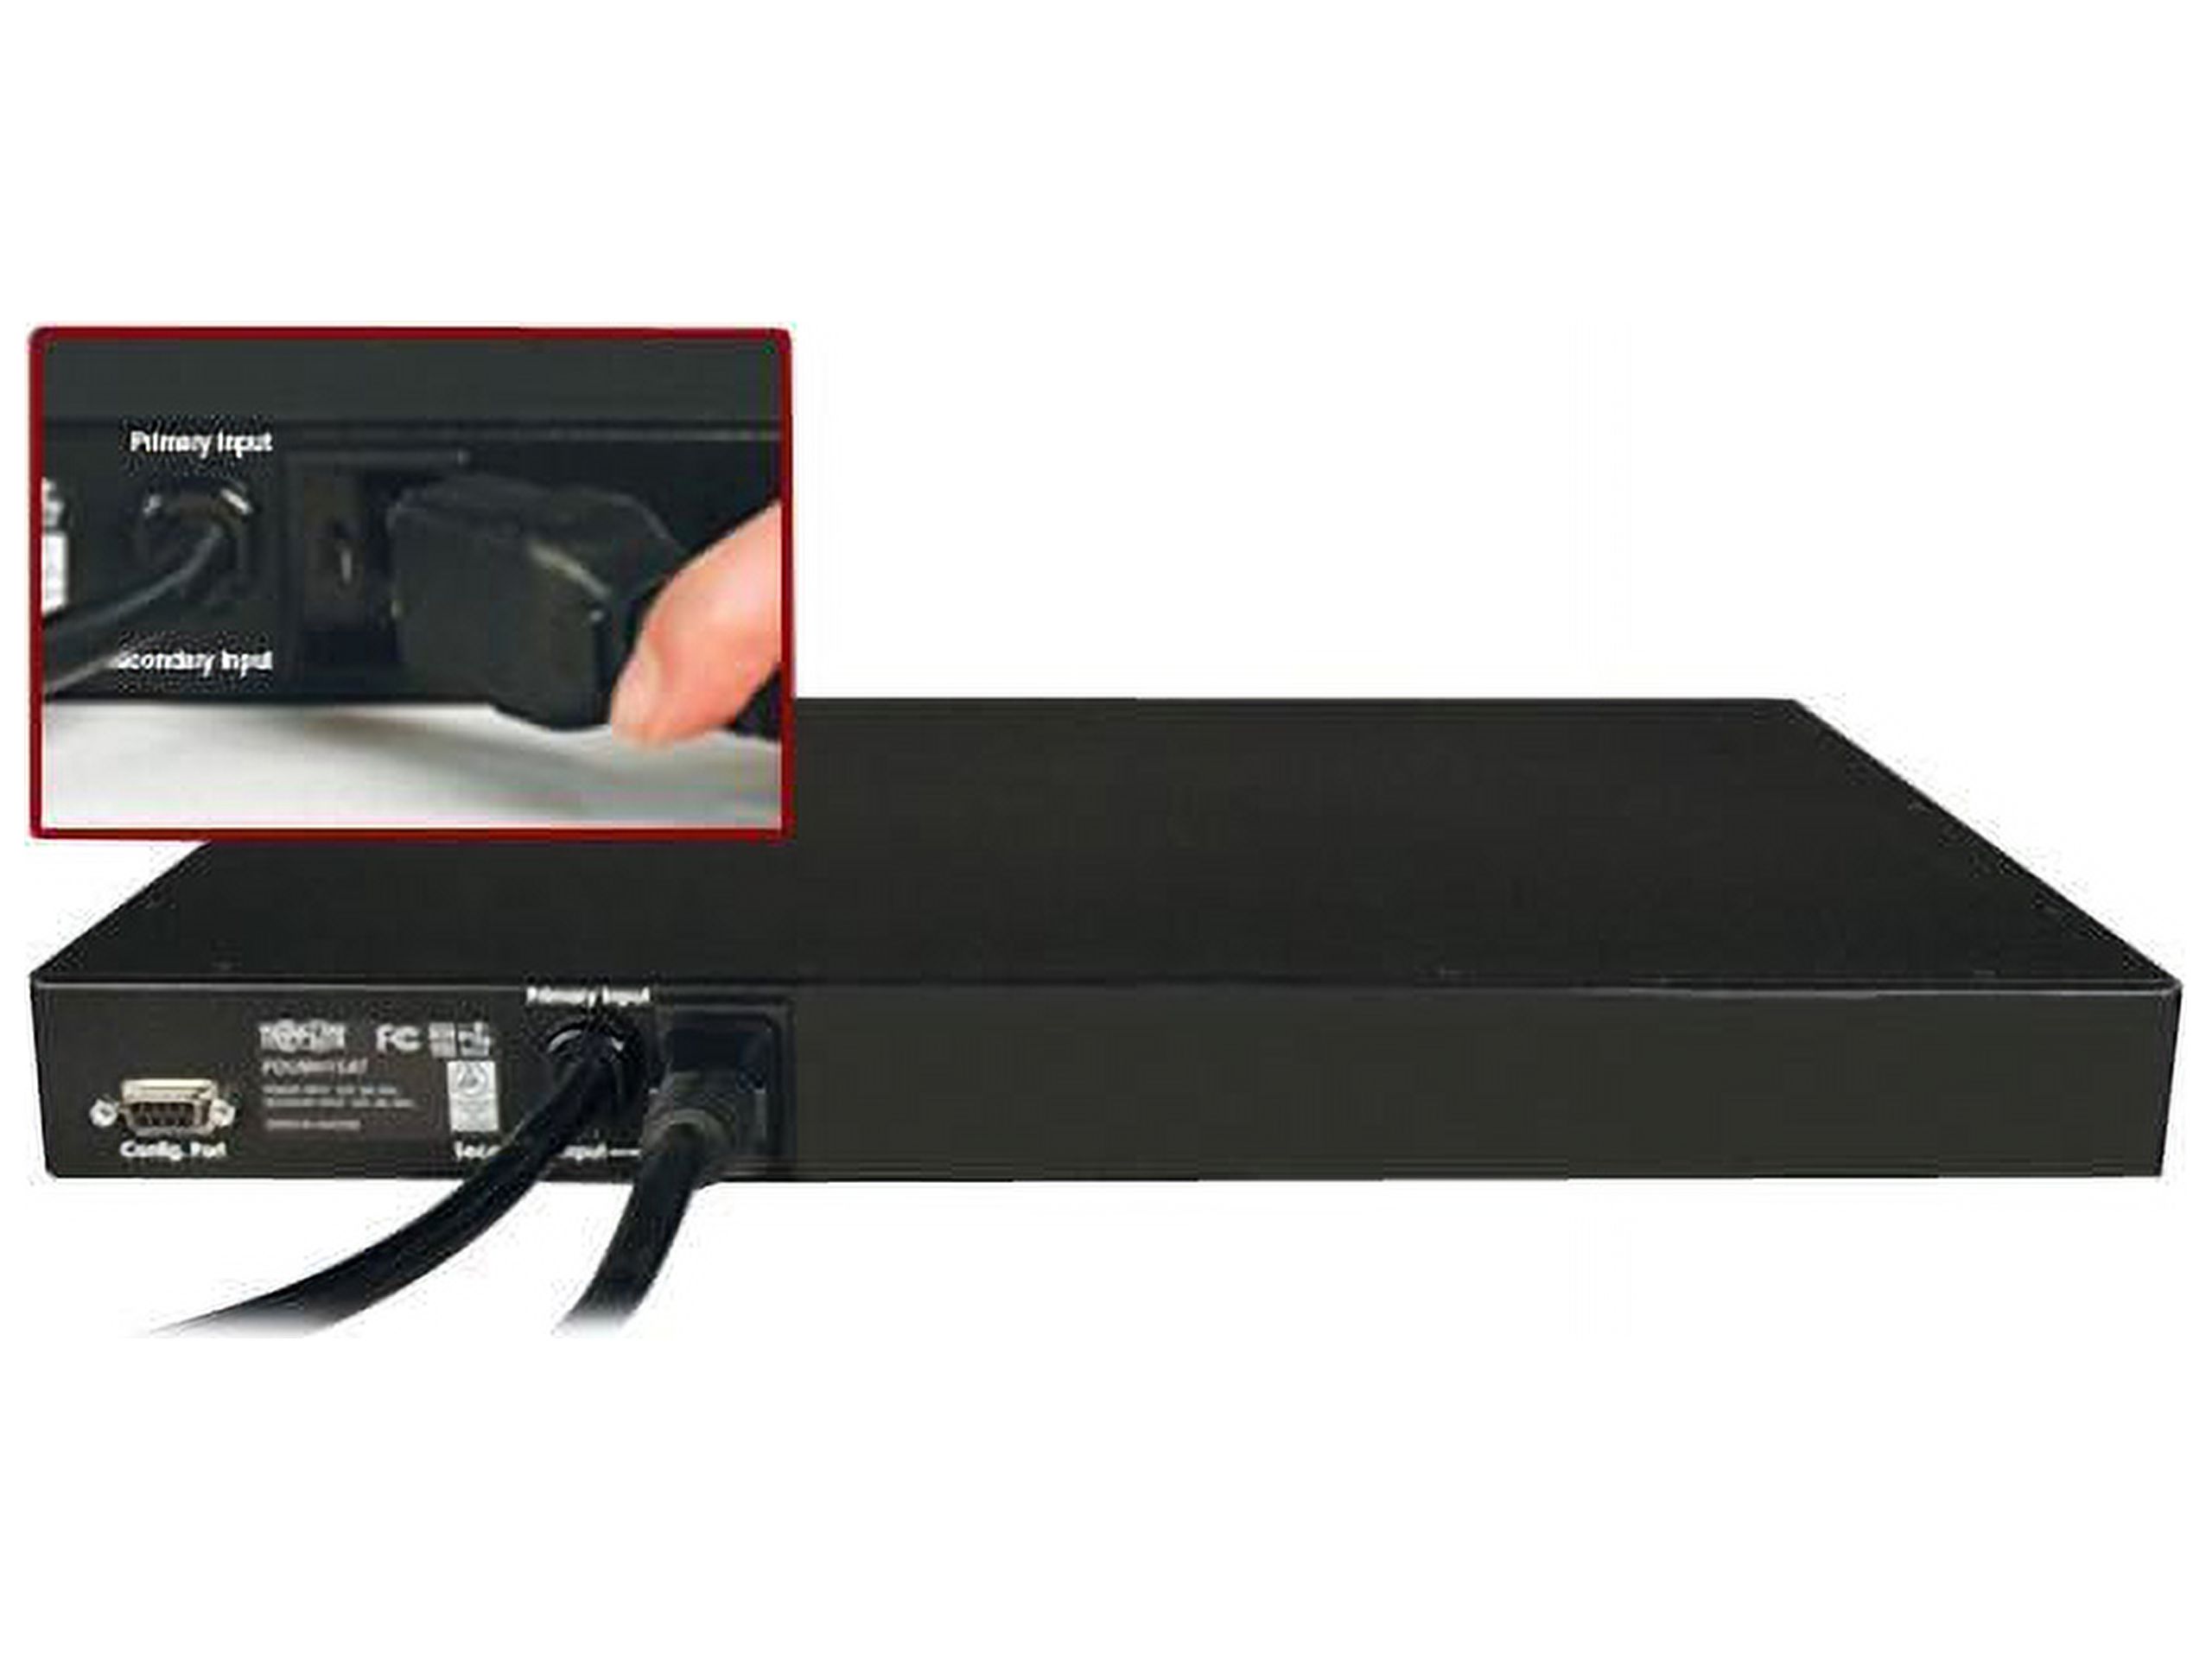 Tripp Lite Metered PDU with ATS, 15A, 8 Outlets (5-15R), 120V, 2 5-15P, 100 - 127 V Input, 2 12 ft. Cords, 1U Rack-Mount Power, TAA (PDUMH15AT) - image 3 of 3